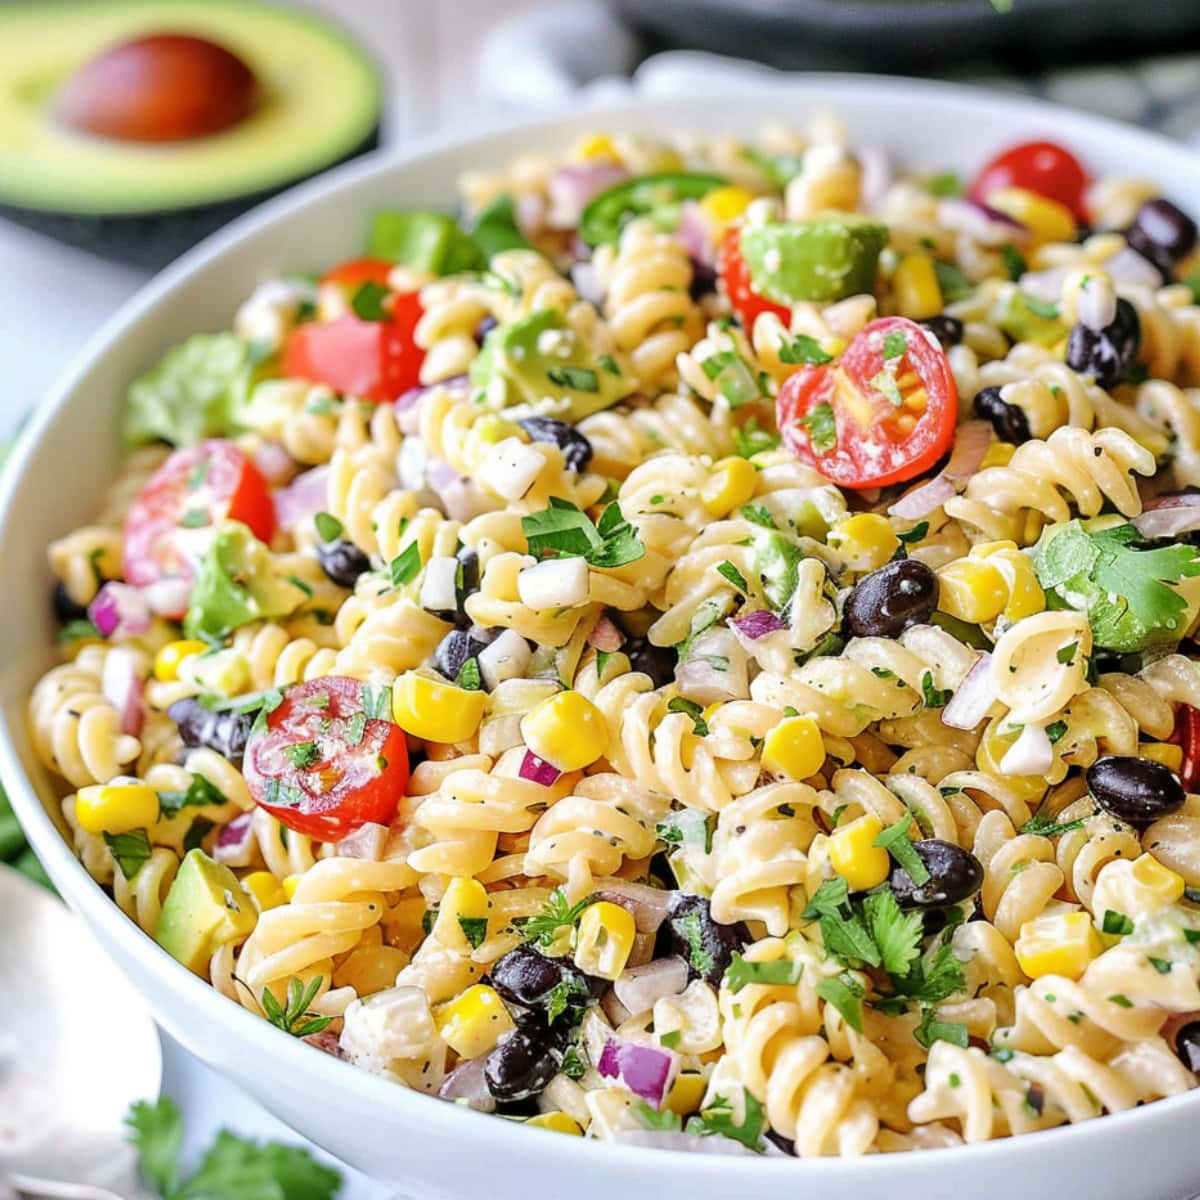 Rotini pasta with black beans, corn kernels, red bell pepper diced, diced red onion, cherry tomatoes, jalapeno pepper minced, fresh cilantro chopped, avocado diced, crumbled feta cheese coated in a creamy white dressing served on a white bowl on a white wooden table.